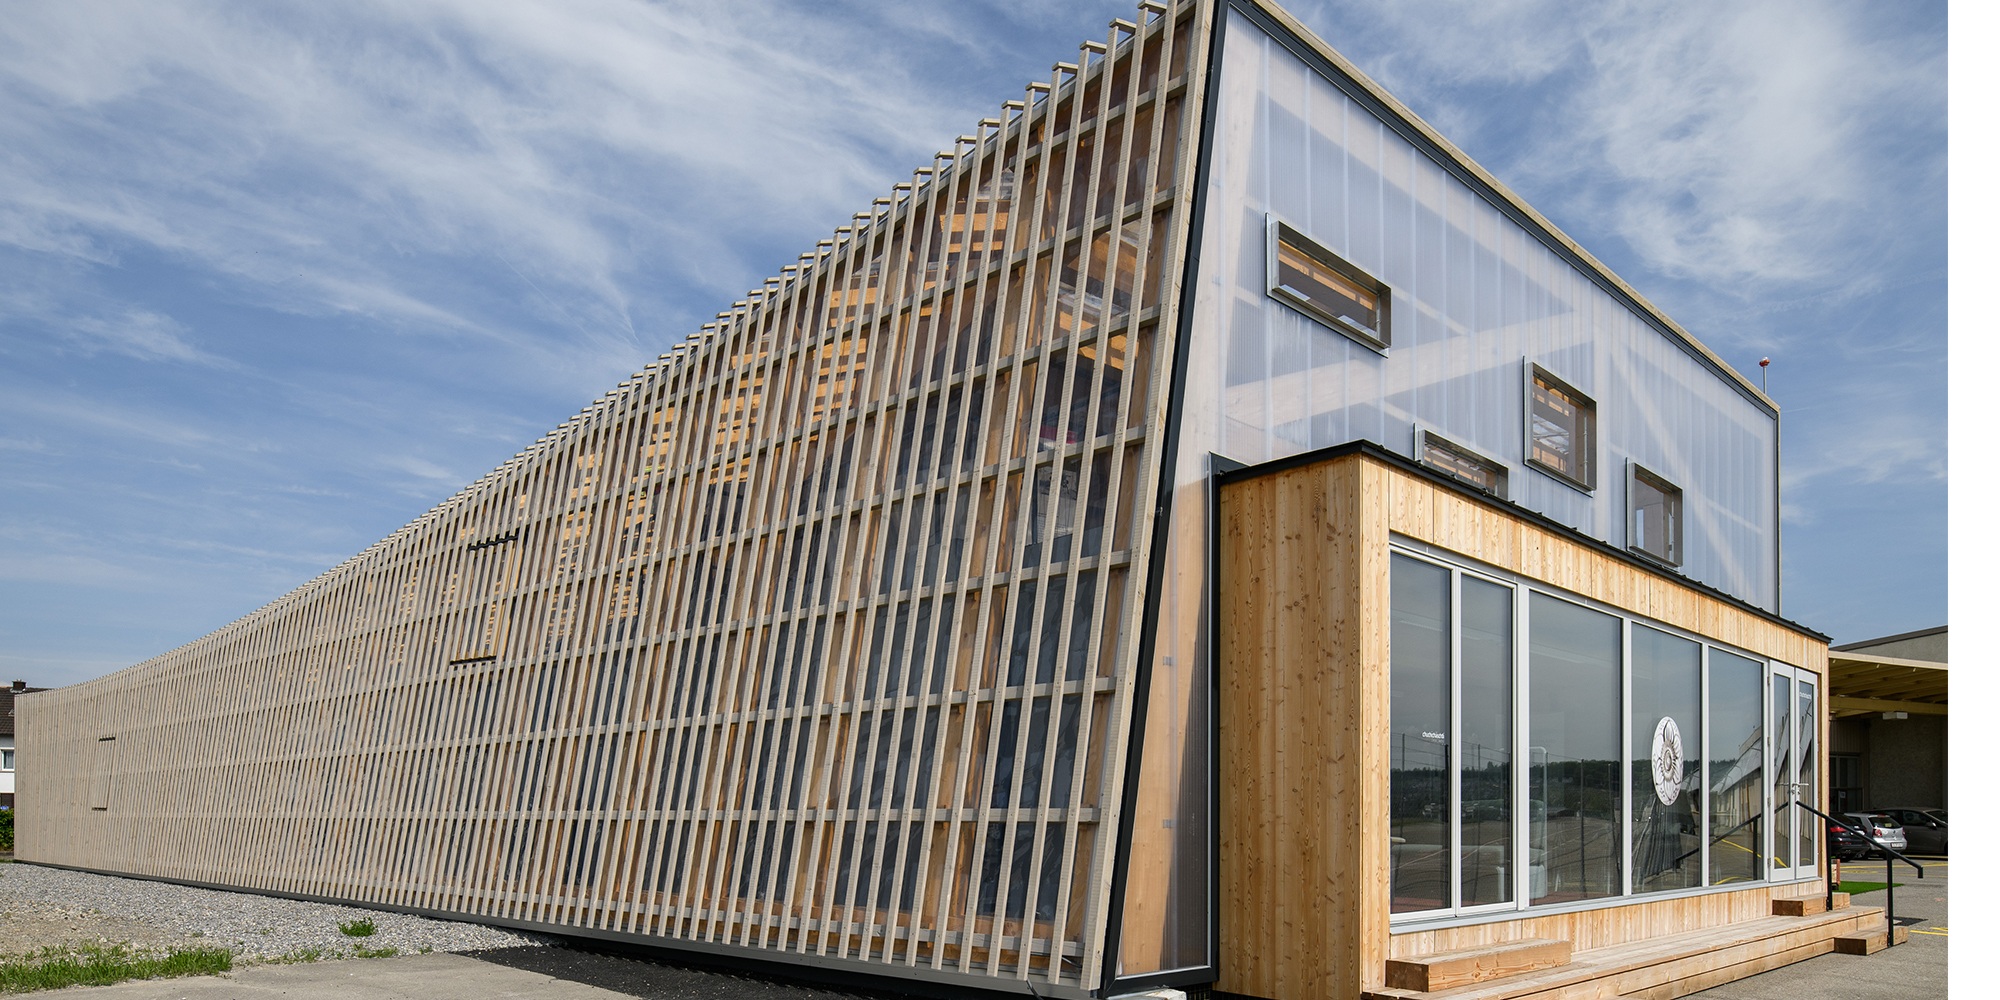 Side view of the Switzerland Innovation Park in Dübendorf with view of the covering structure comprising wooden slats and a membrane.